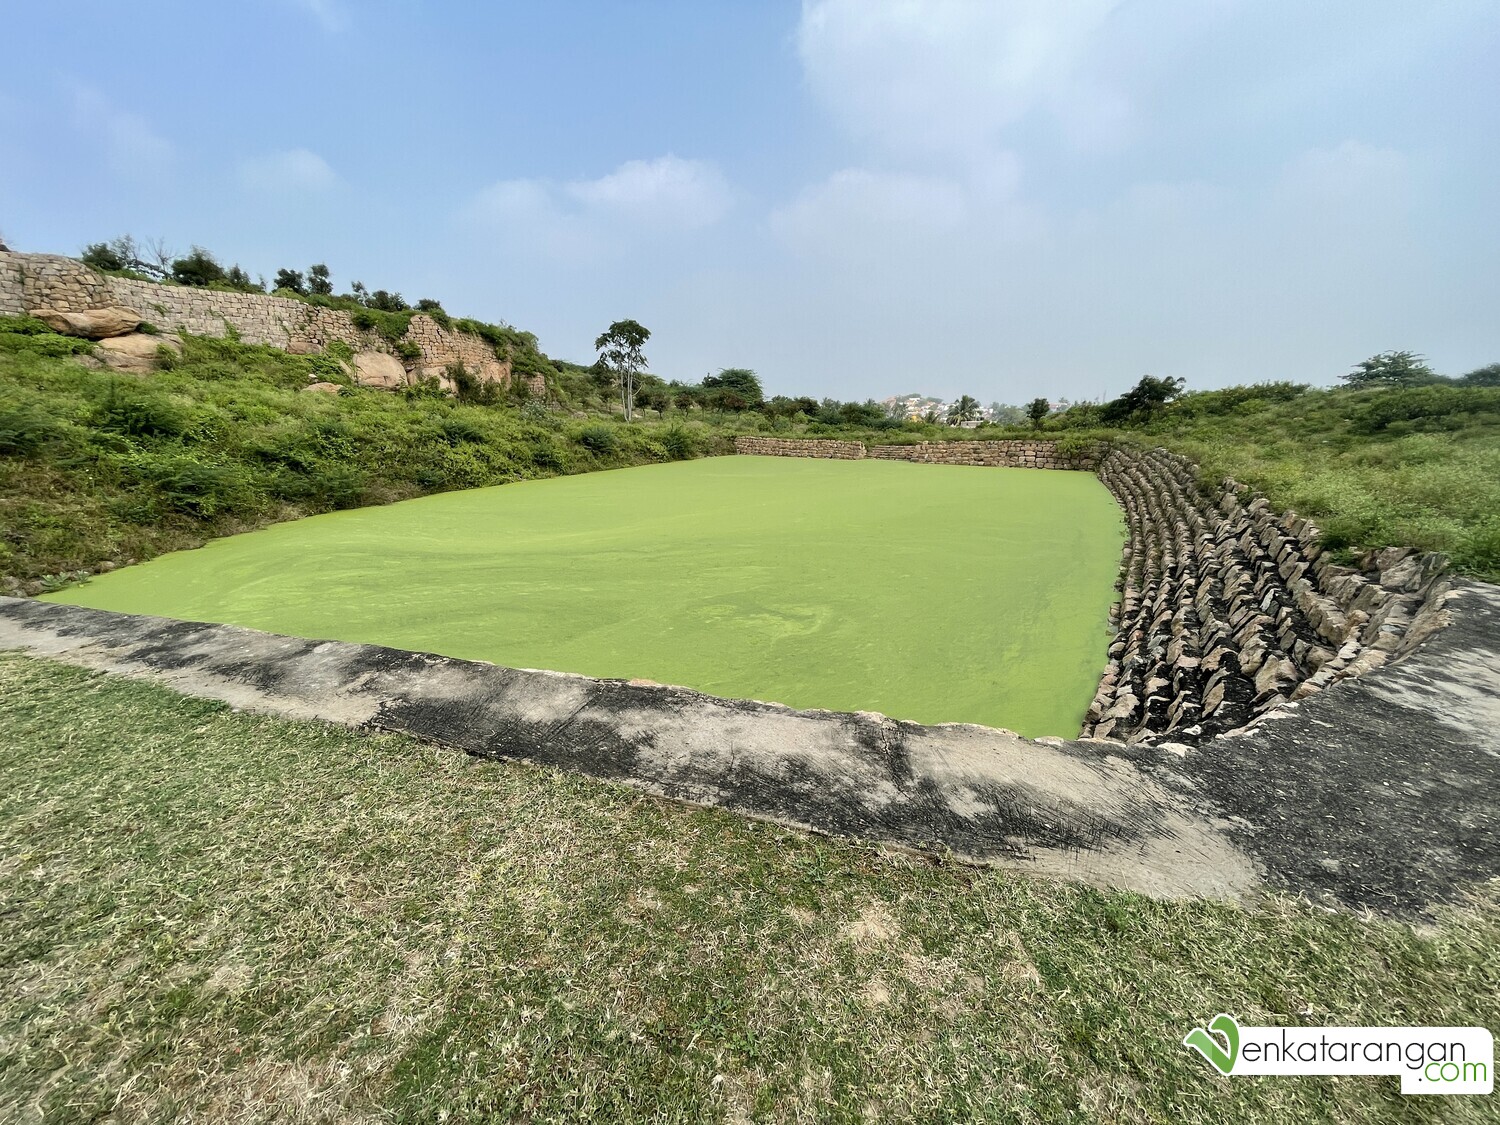 A pond at the foot of the hill covered with algae at Sankagiri Fort